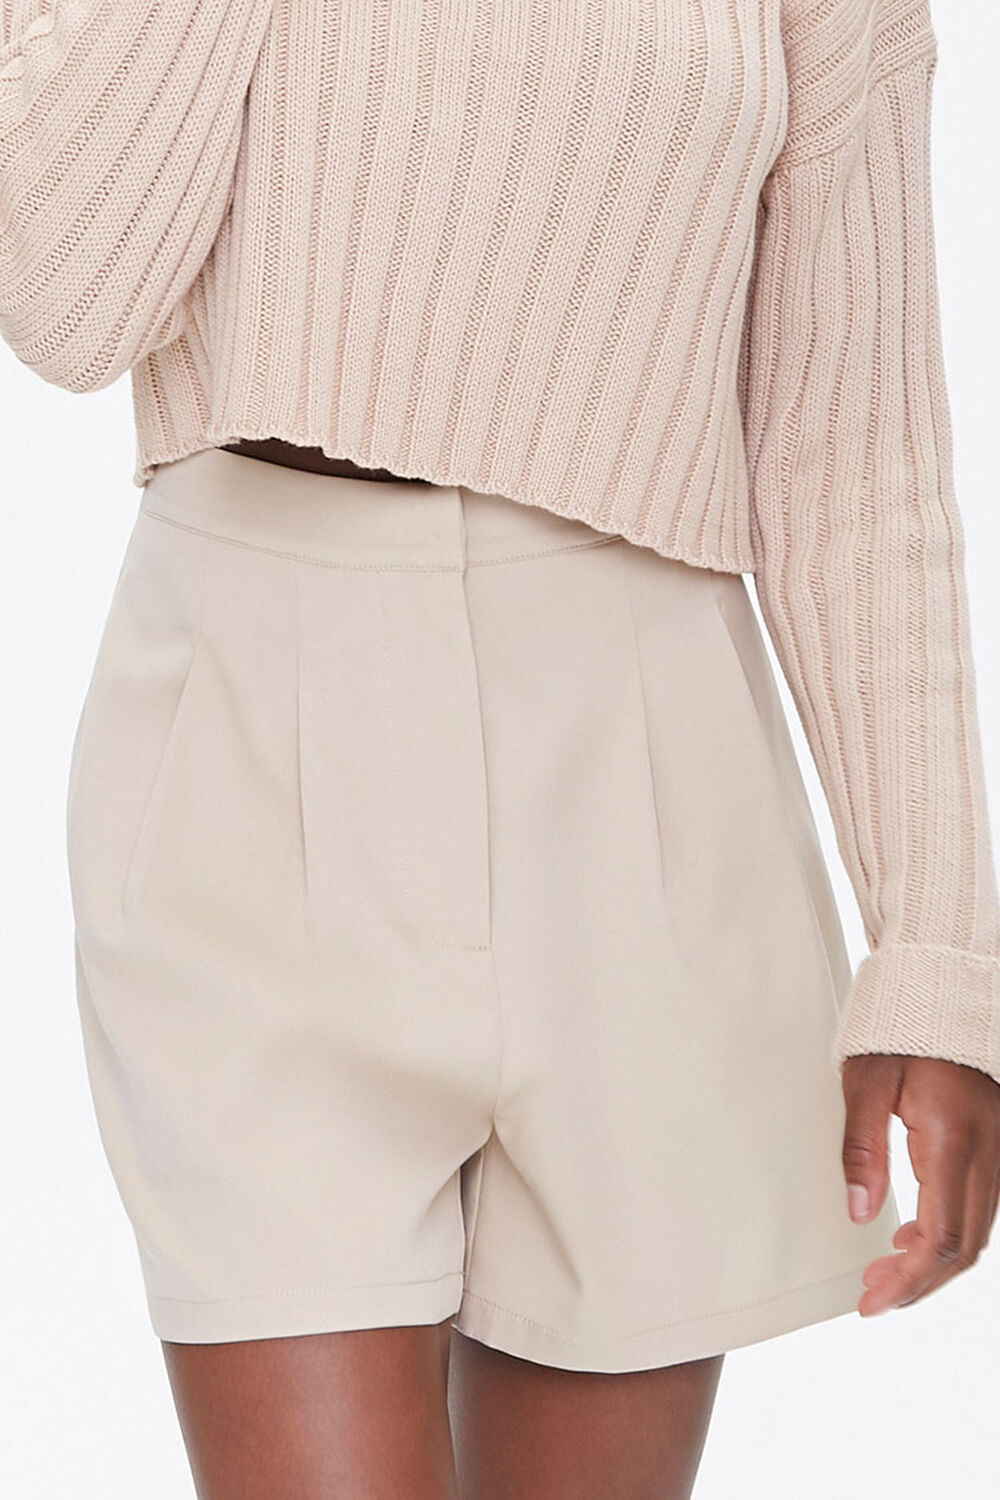 SAND Pleated High-Rise Shorts, image 2